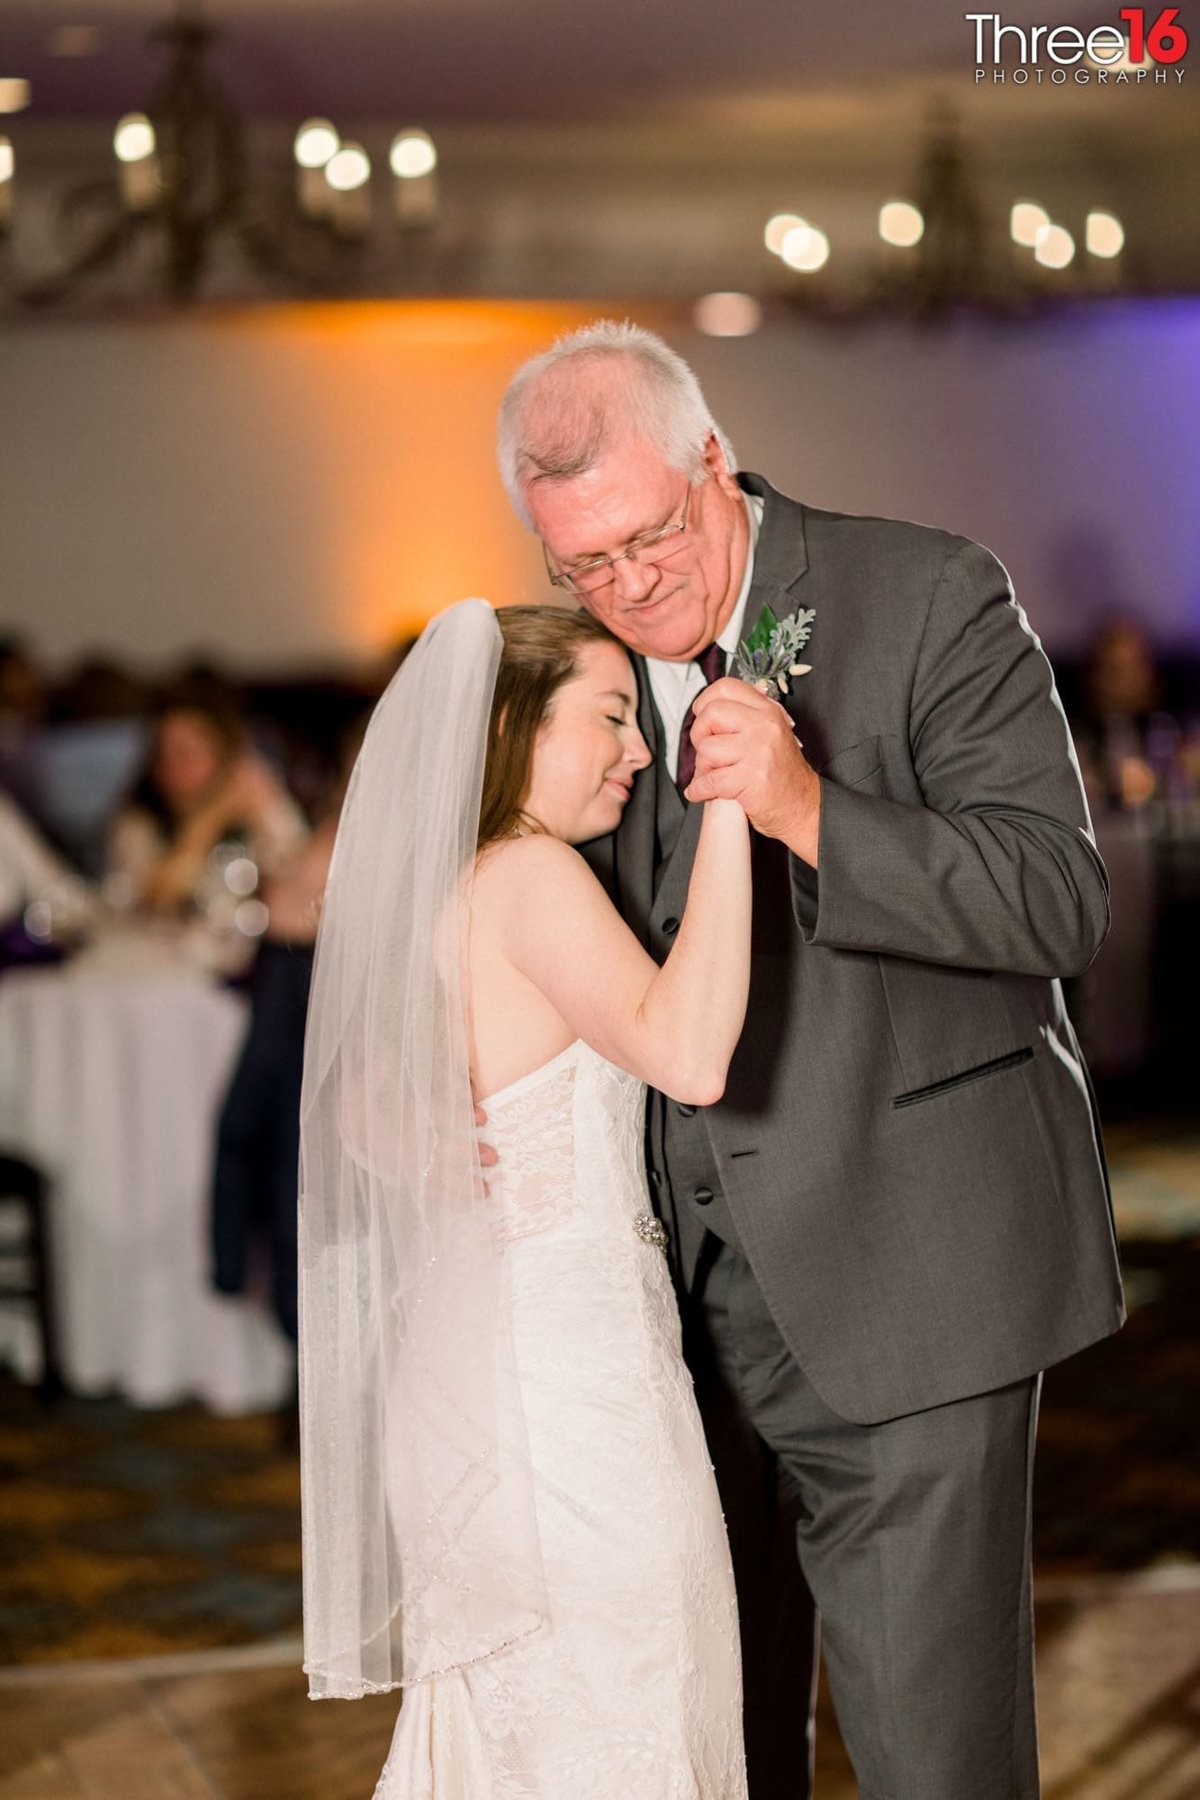 Bride dances with her father at her reception